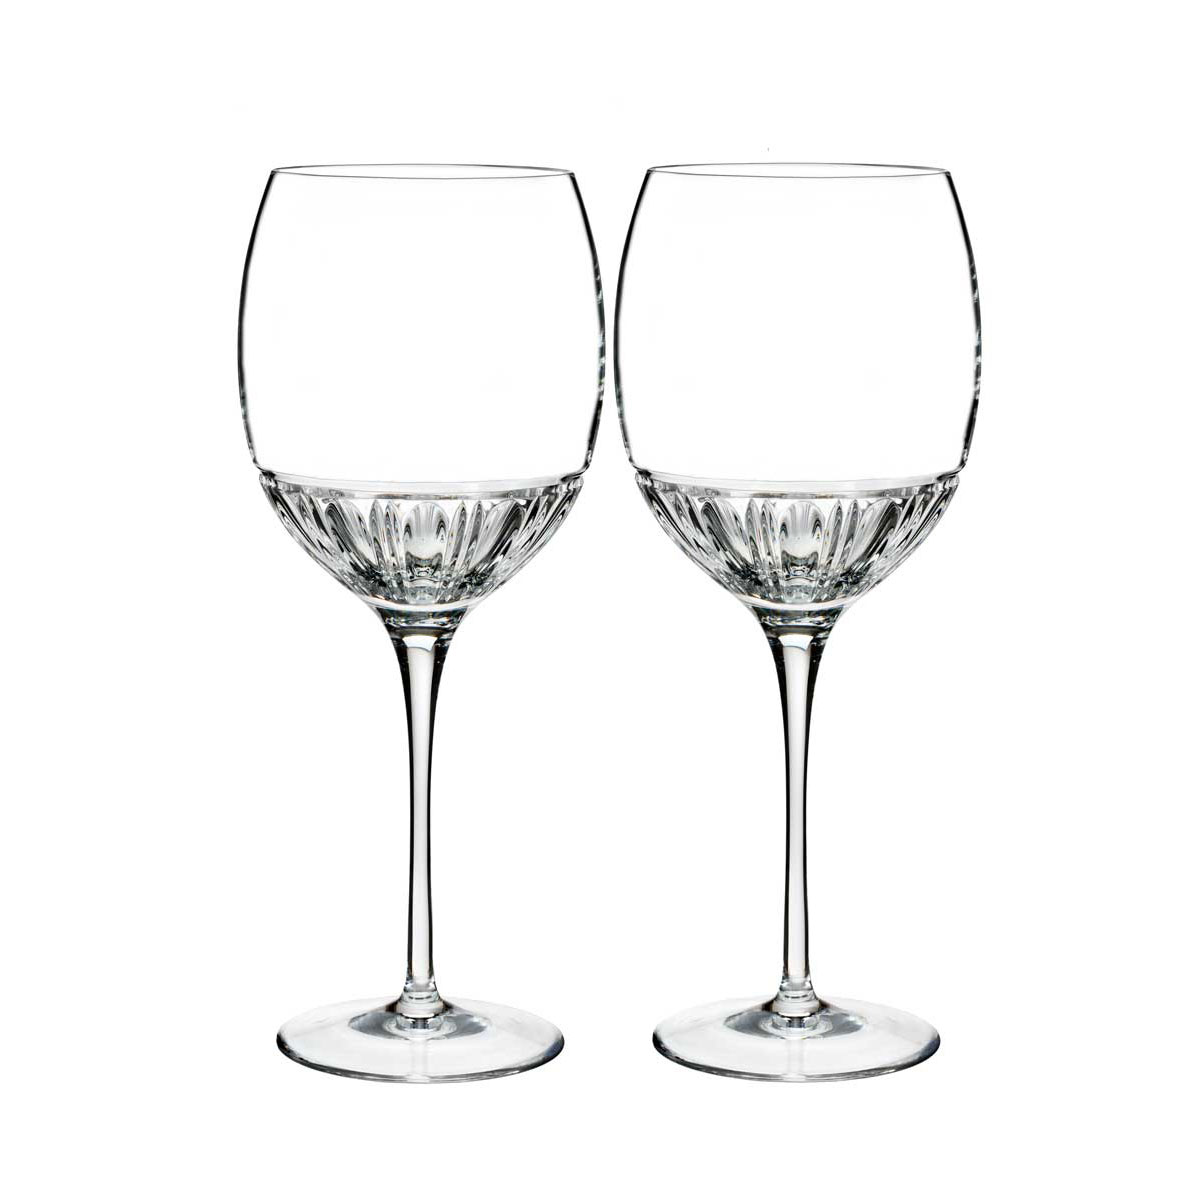 Marquis by Waterford Crystal, Addison All Purpose Crystal Wine, Pair